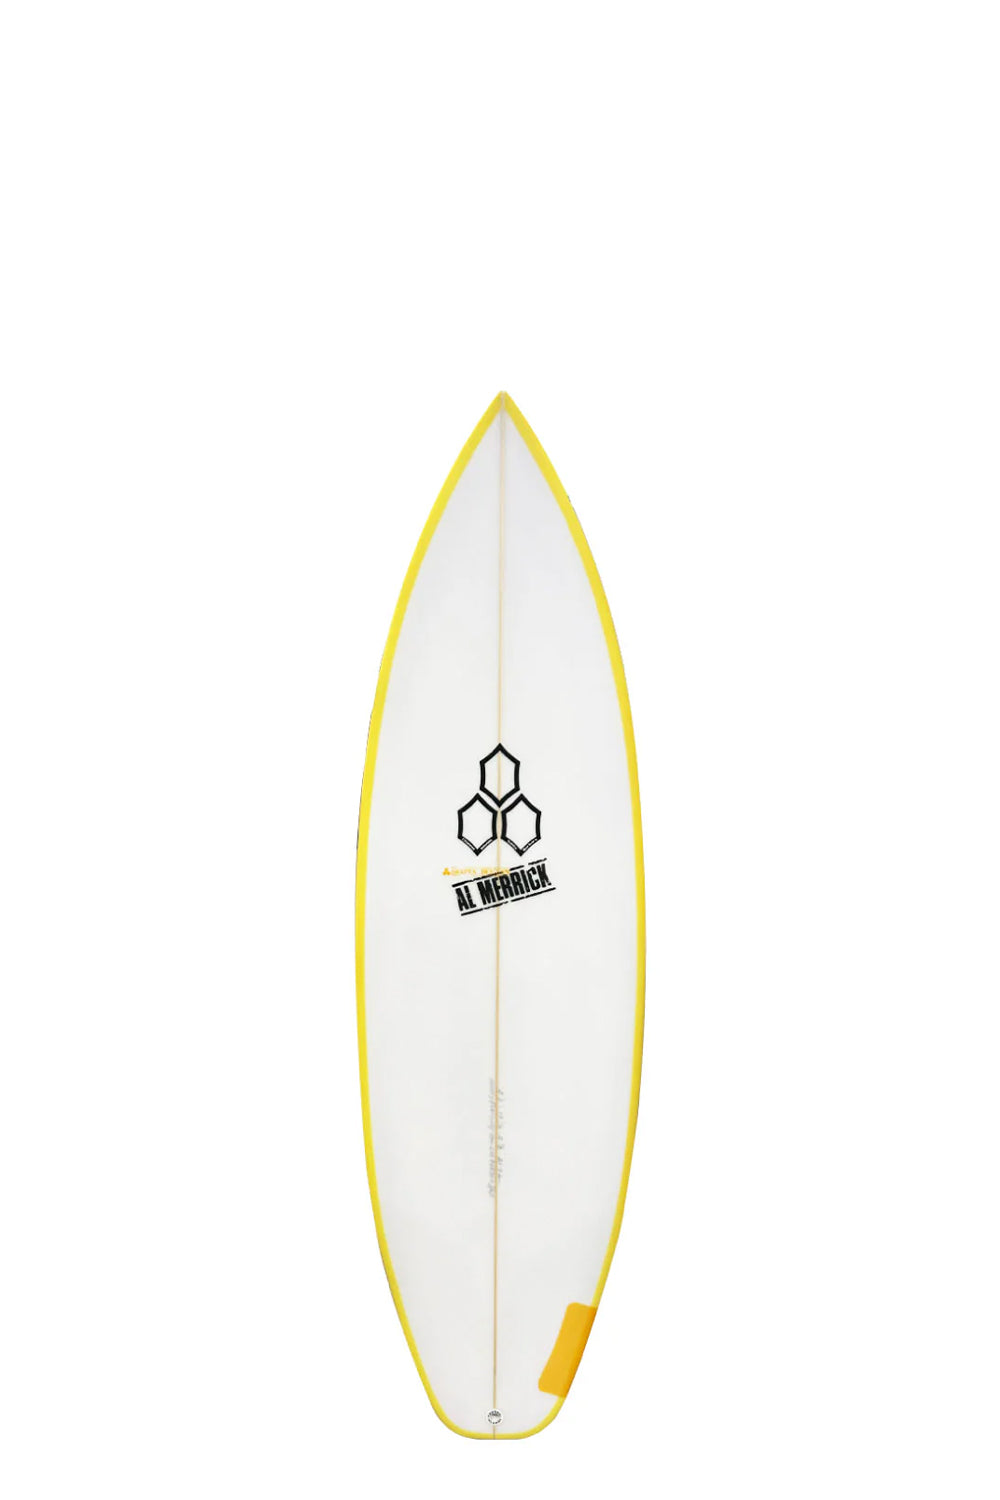 Channel Islands GROM Happy Everyday Surfboard